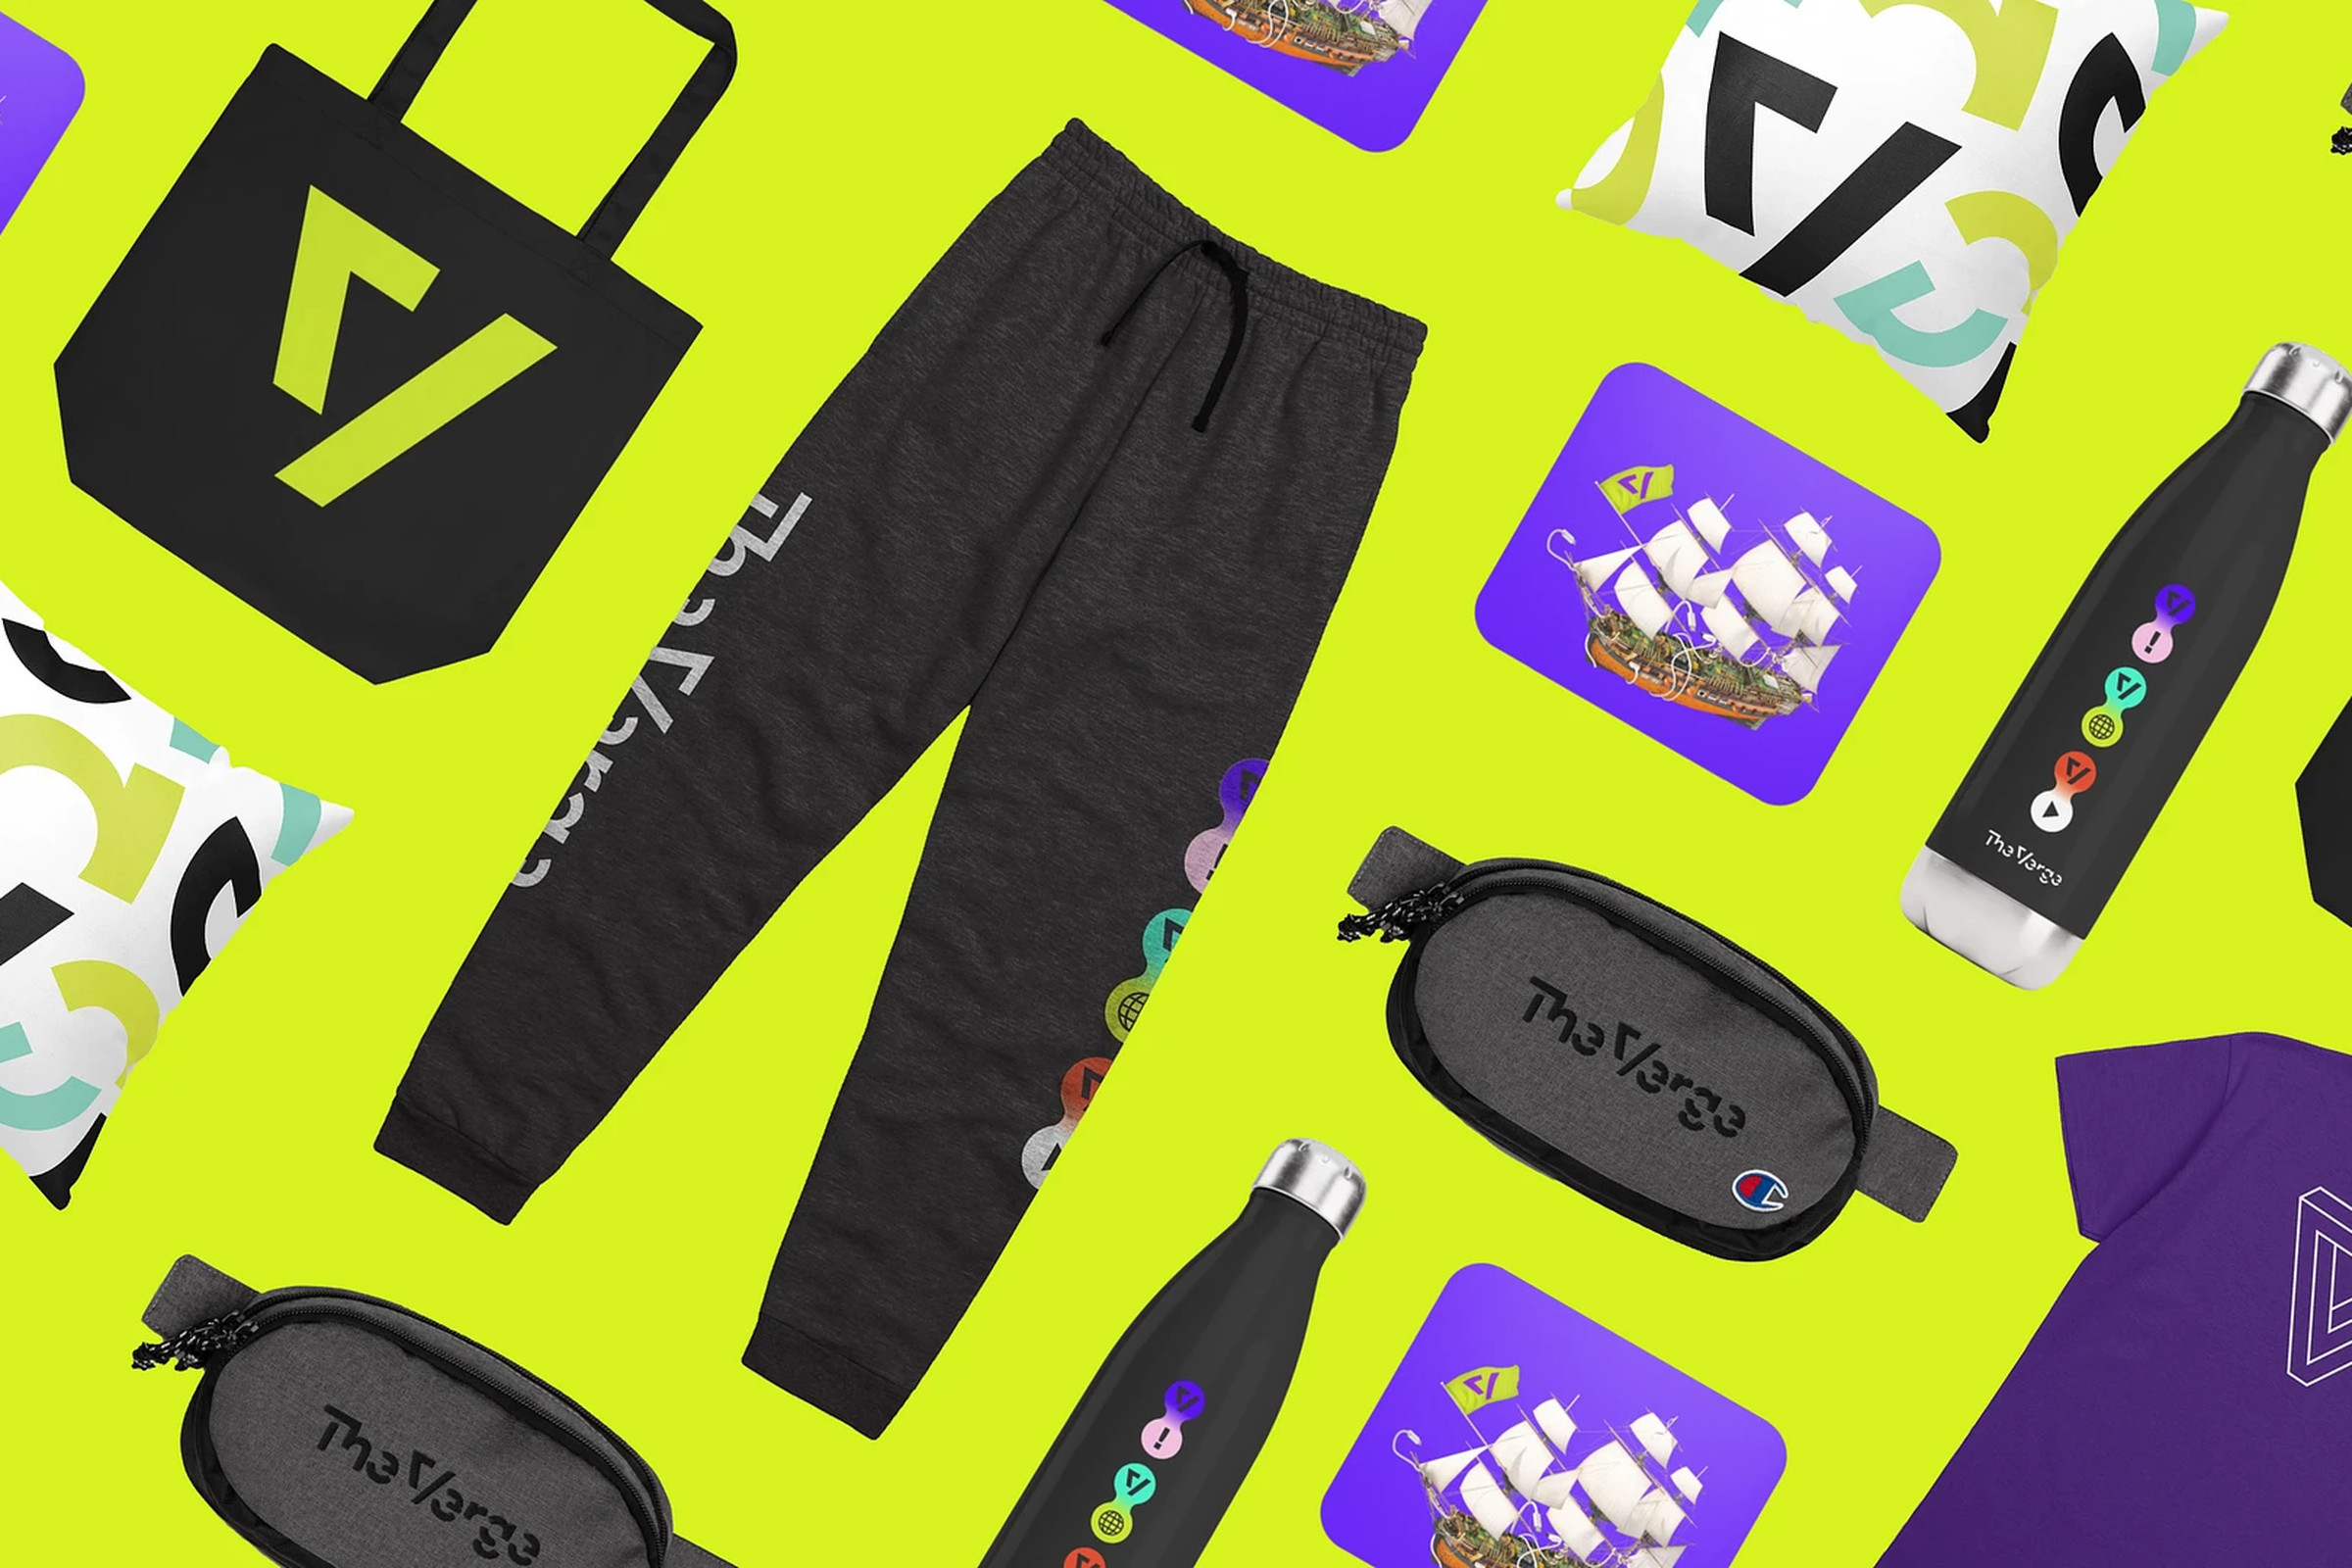 Merch from The Verge